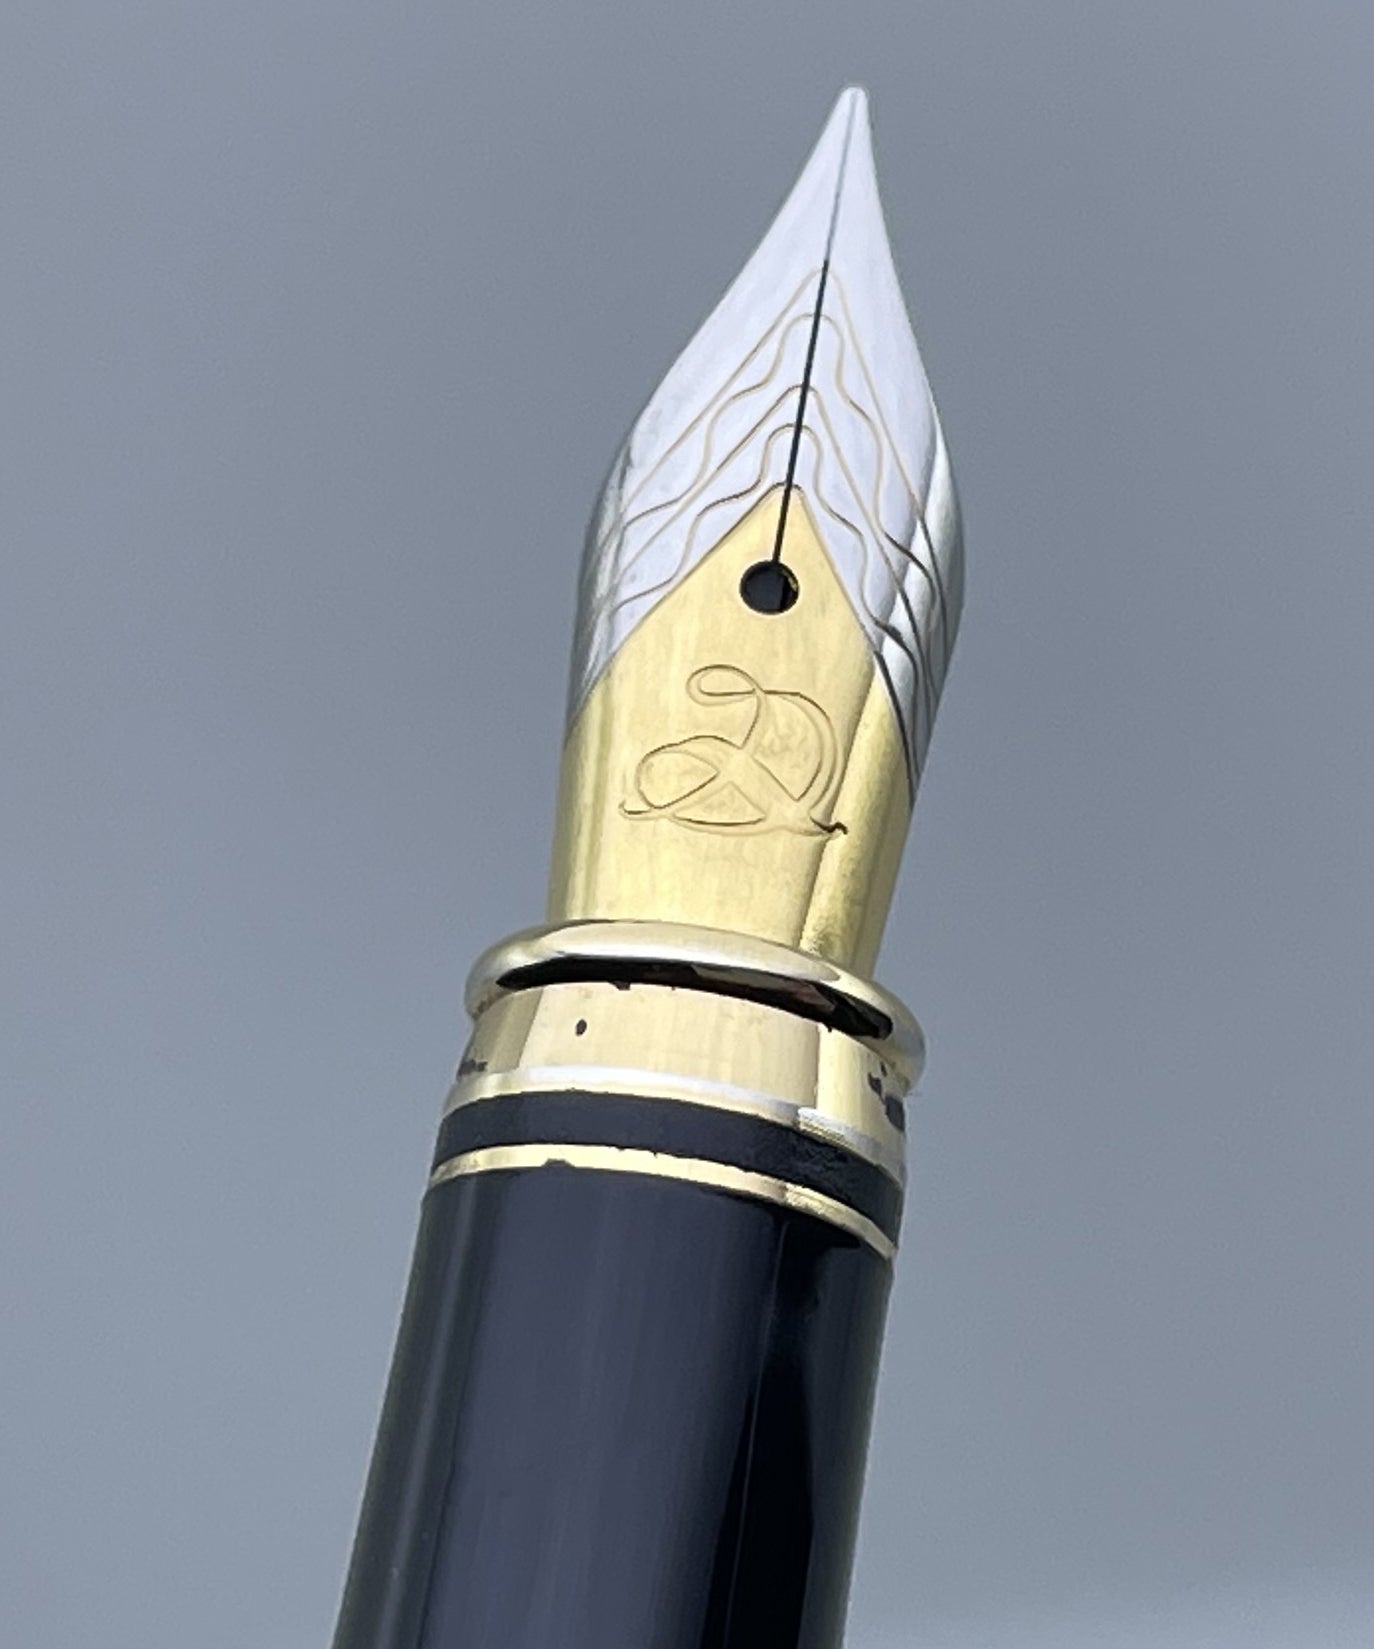 Delta Gold Plated Vintage Fountain Pen